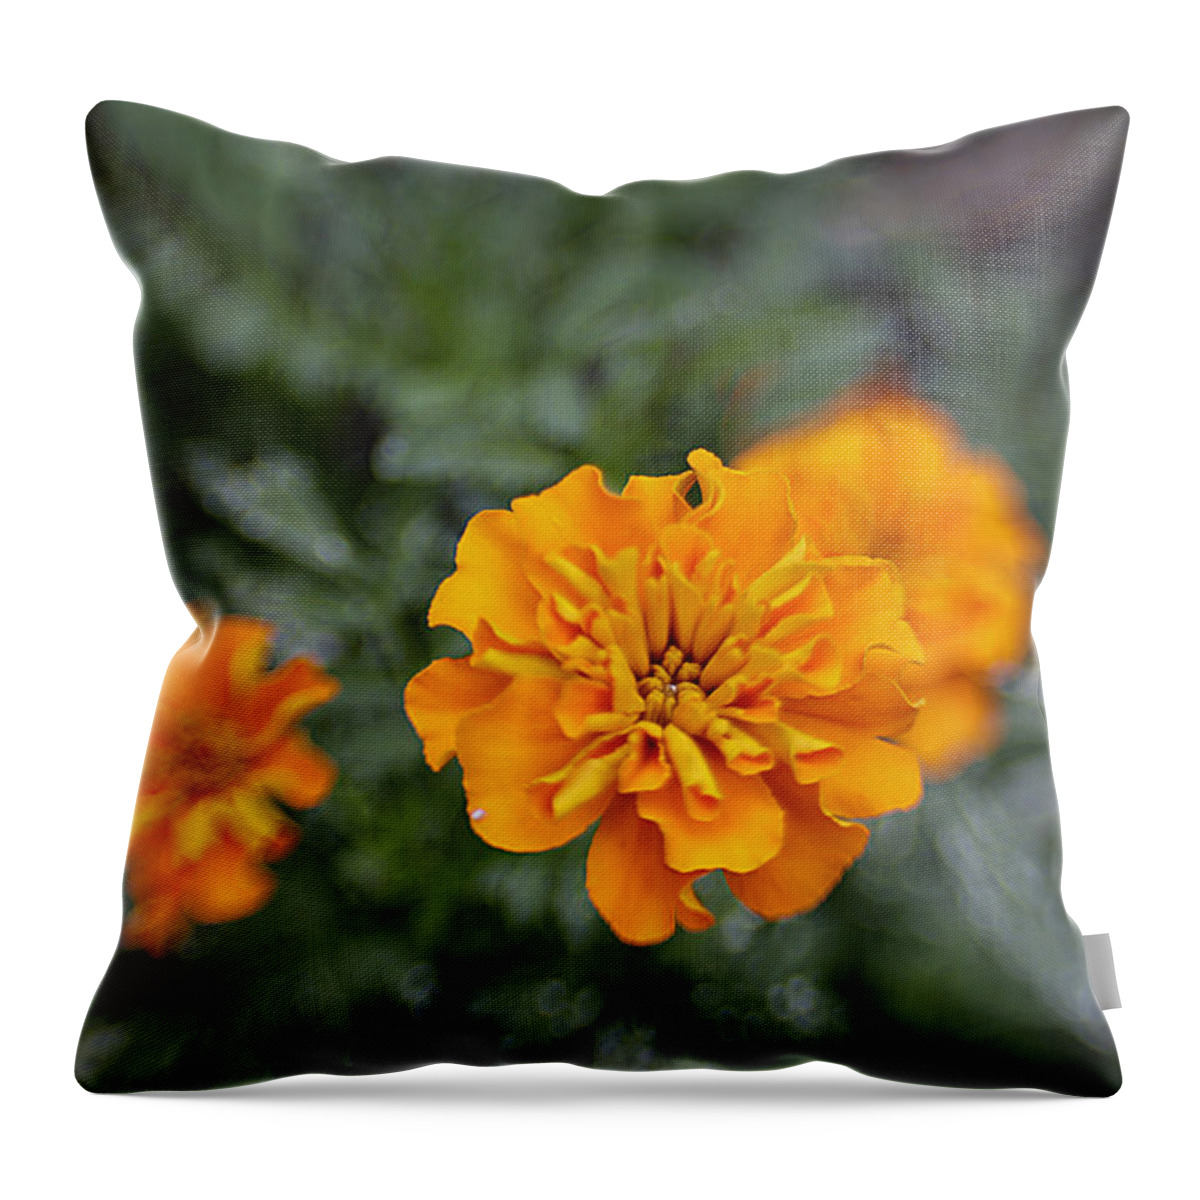 Flowers Throw Pillow featuring the photograph Aidan's Orange by Jean Macaluso